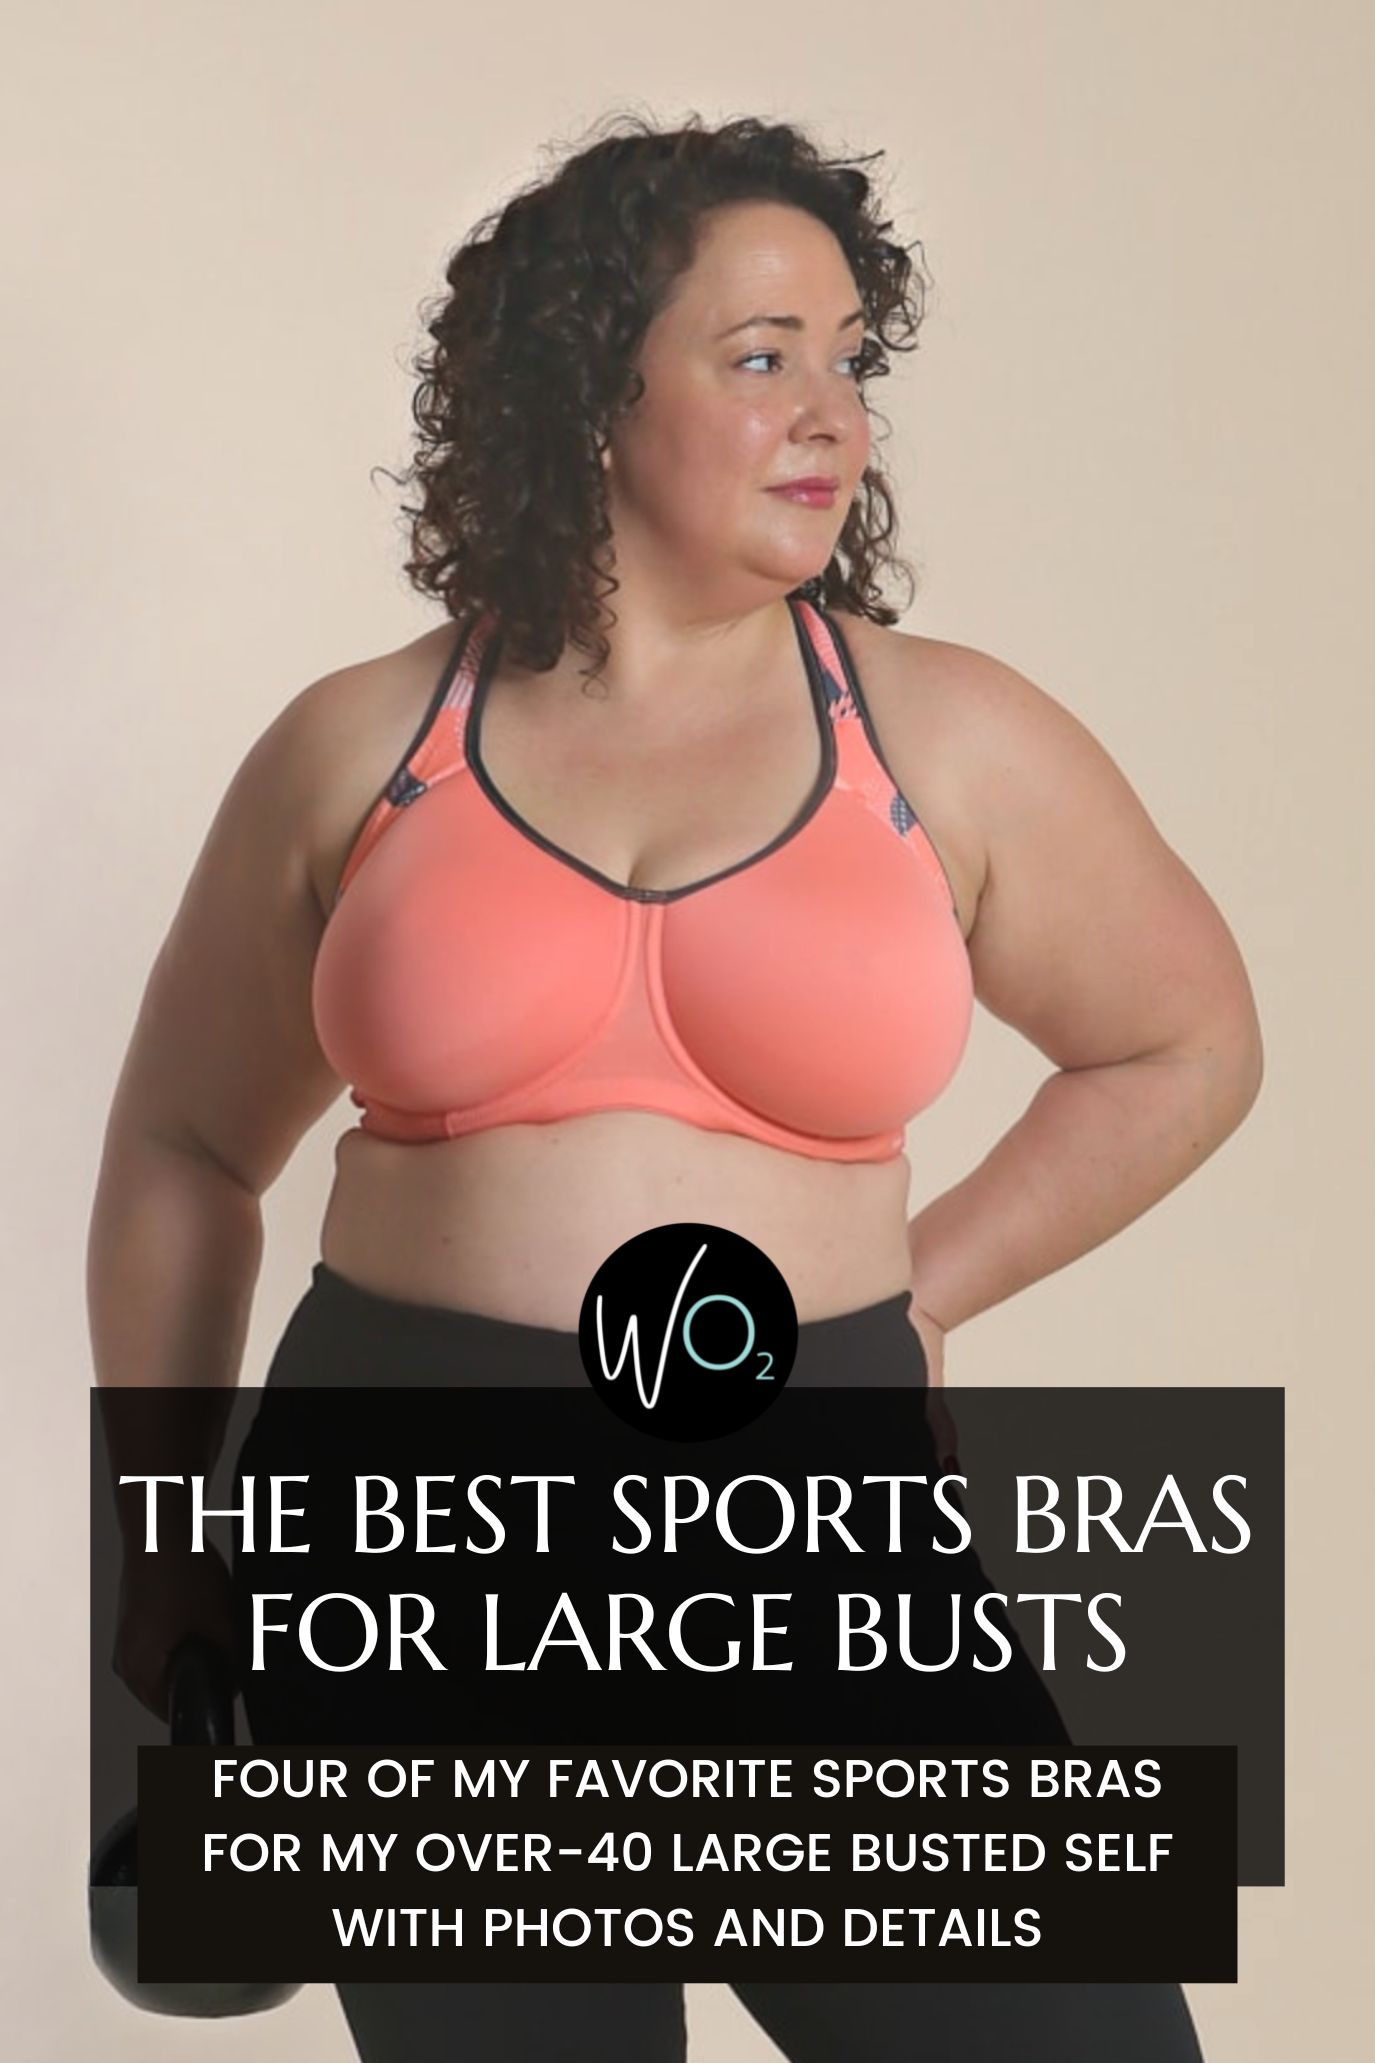 Sports Bras for Large Busts: My 4 Favorite Styles